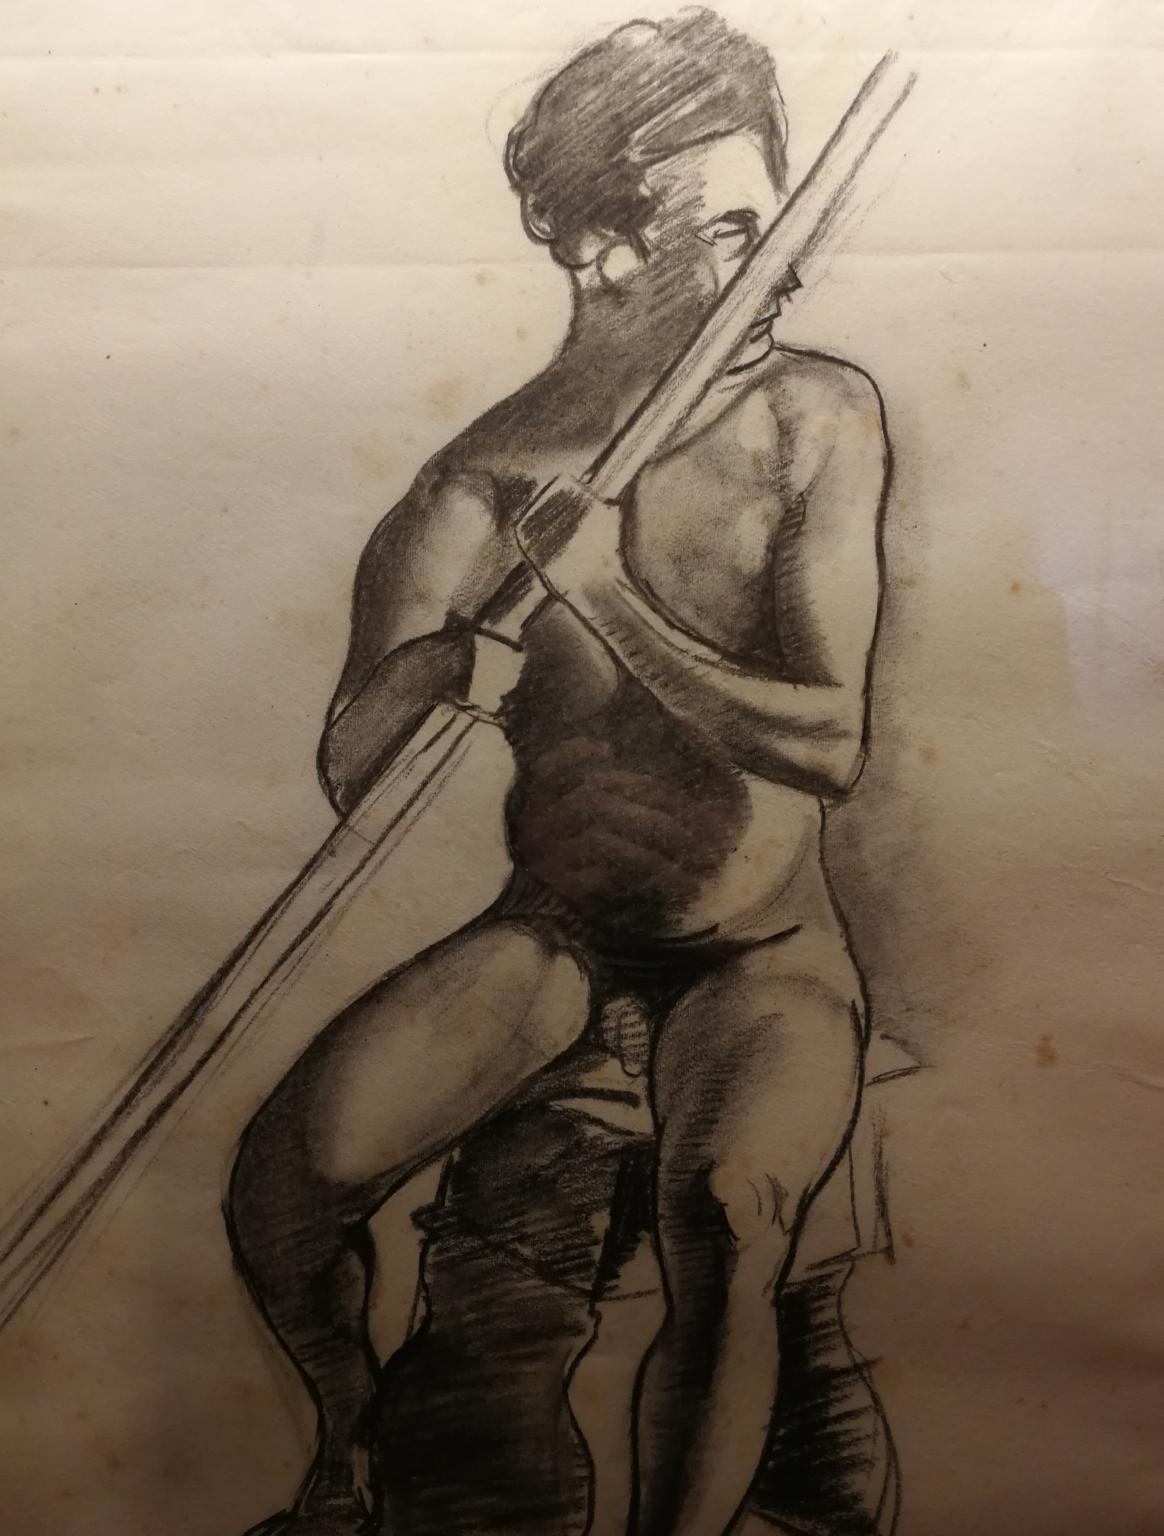 Signed G. ColacicchI Male Nude Portrait Charcoal Drawing dated 1924 - Art by Giovanni Colacicchi